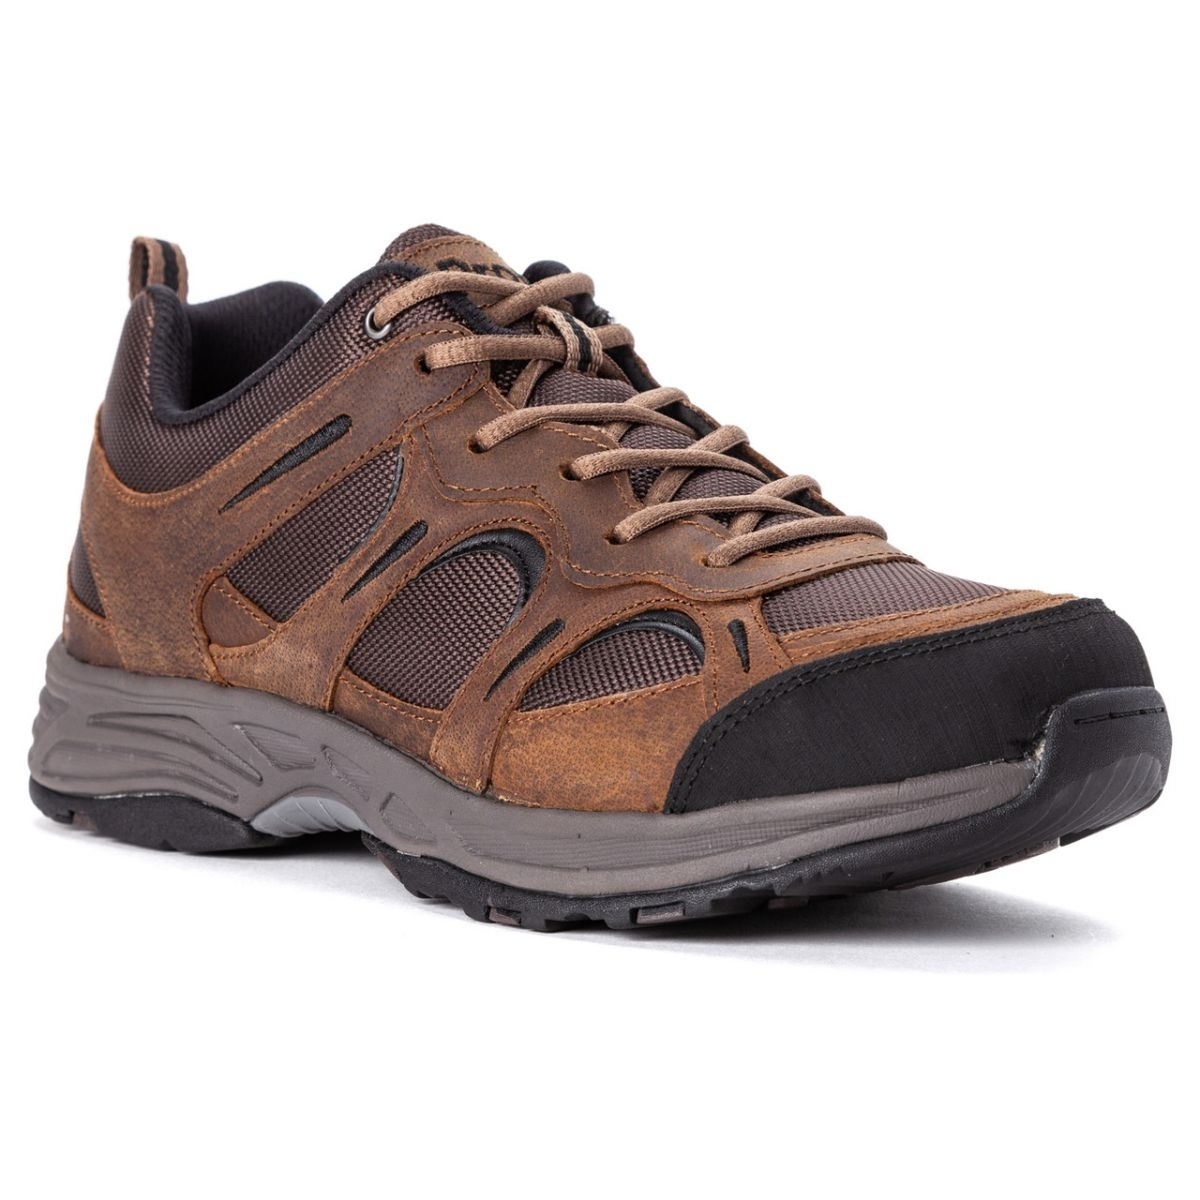 Propet Men's Connelly Hiking Shoe Brown - M5503BR BROWN - BROWN, 8.5-3E